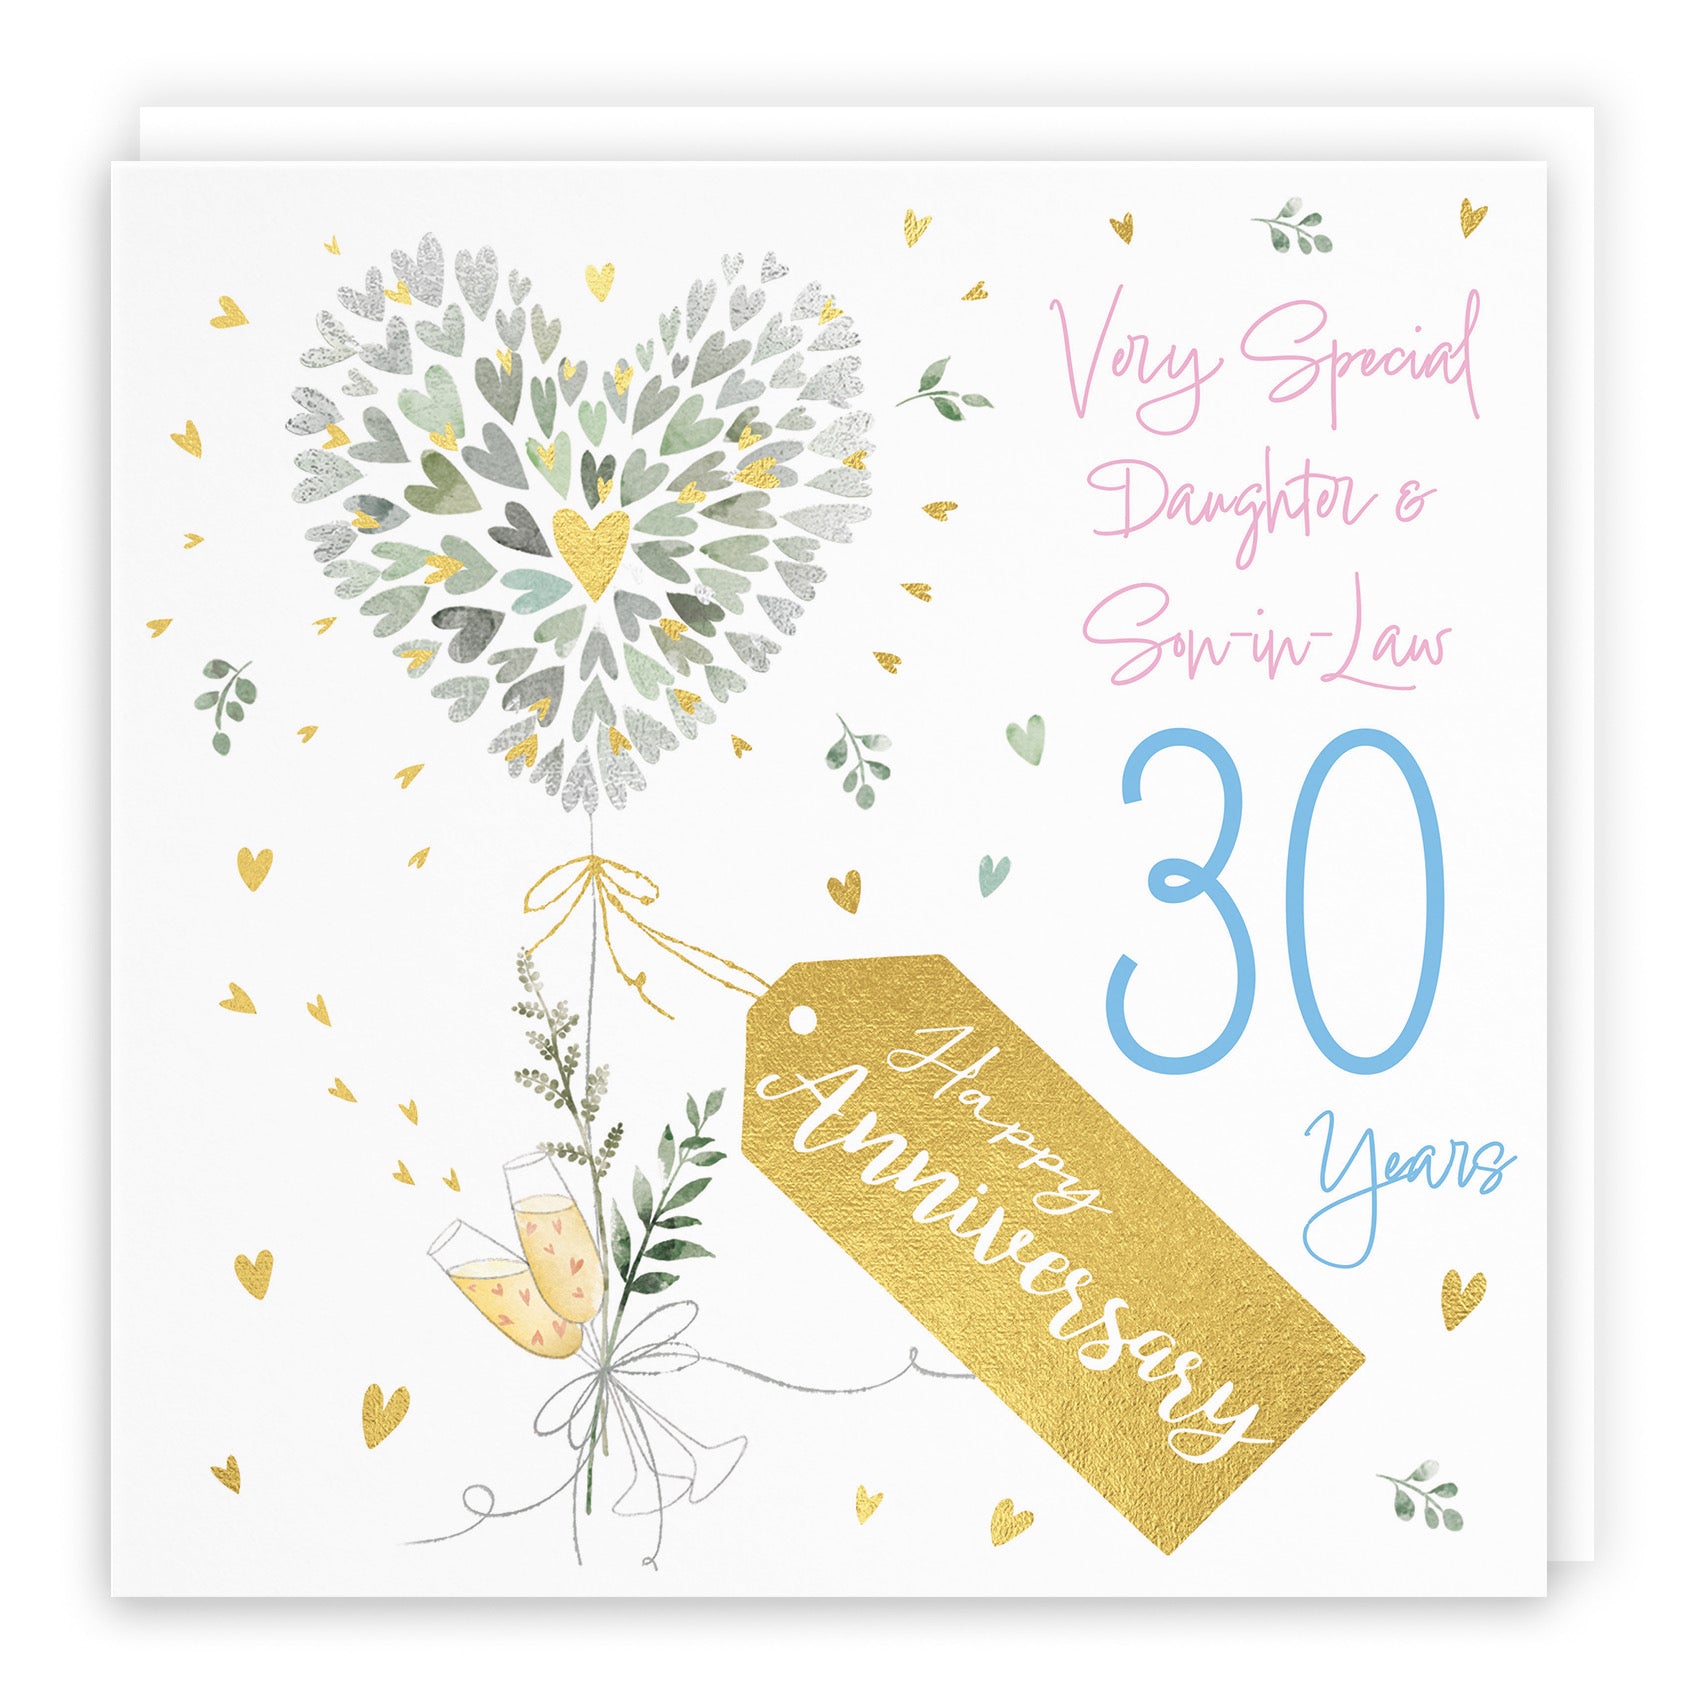 Daughter And Son-in-Law 30th Anniversary Card Contemporary Hearts Milo's Gallery - Default Title (B0CKJ6VM7R)